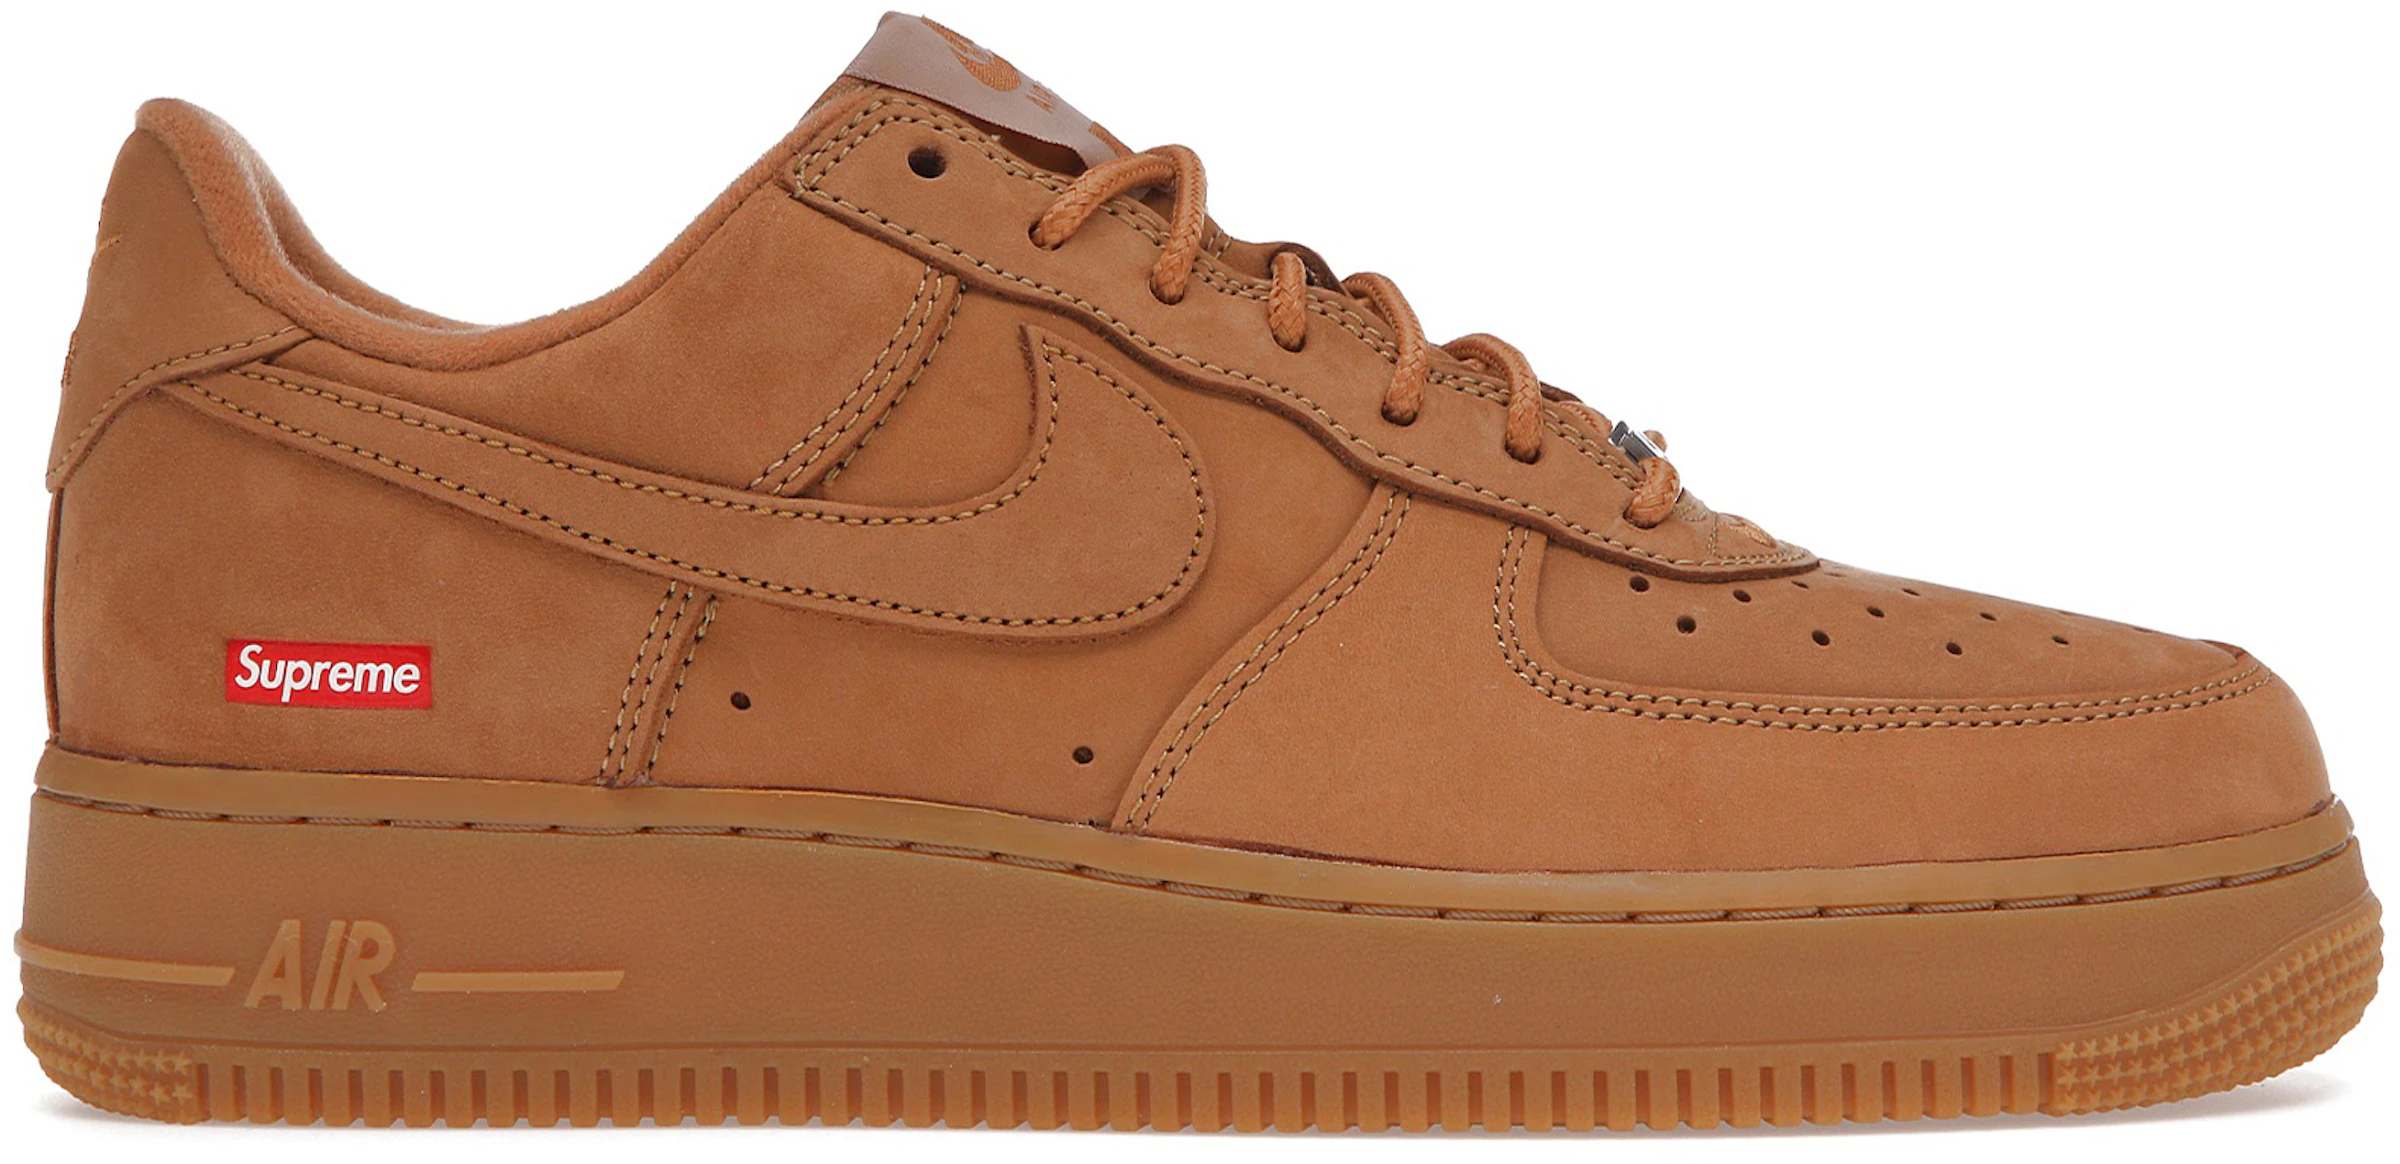 Egoísmo regular Macadán Nike Air Force 1 Low SP Supreme Wheat - DN1555-200 - US